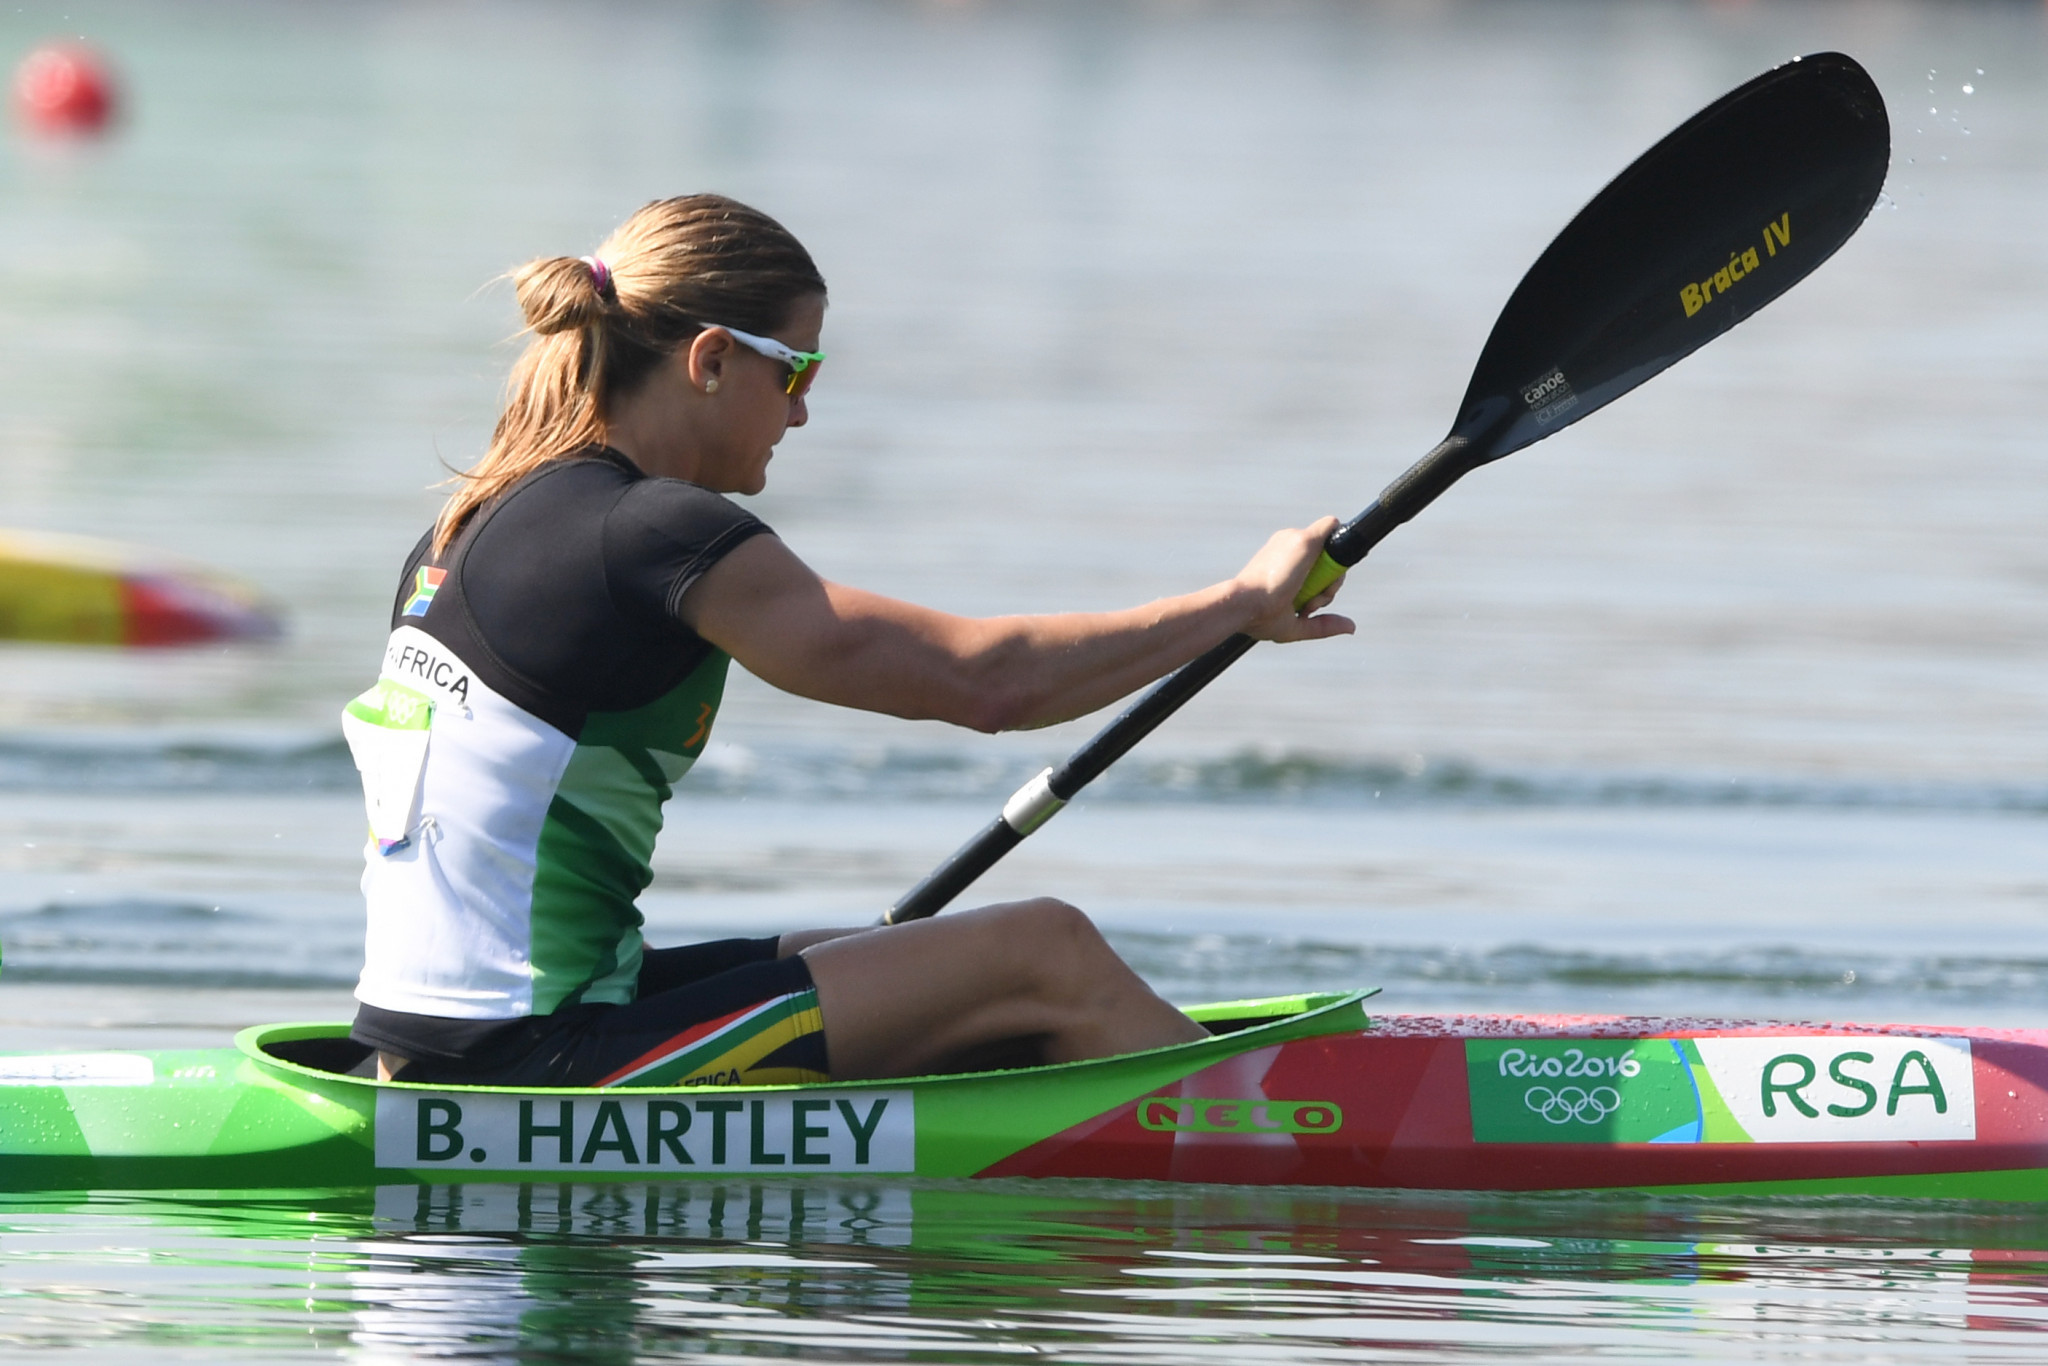 SASCOC praise Hartley after inclusion on list of IOC Athletes' Commission candidates